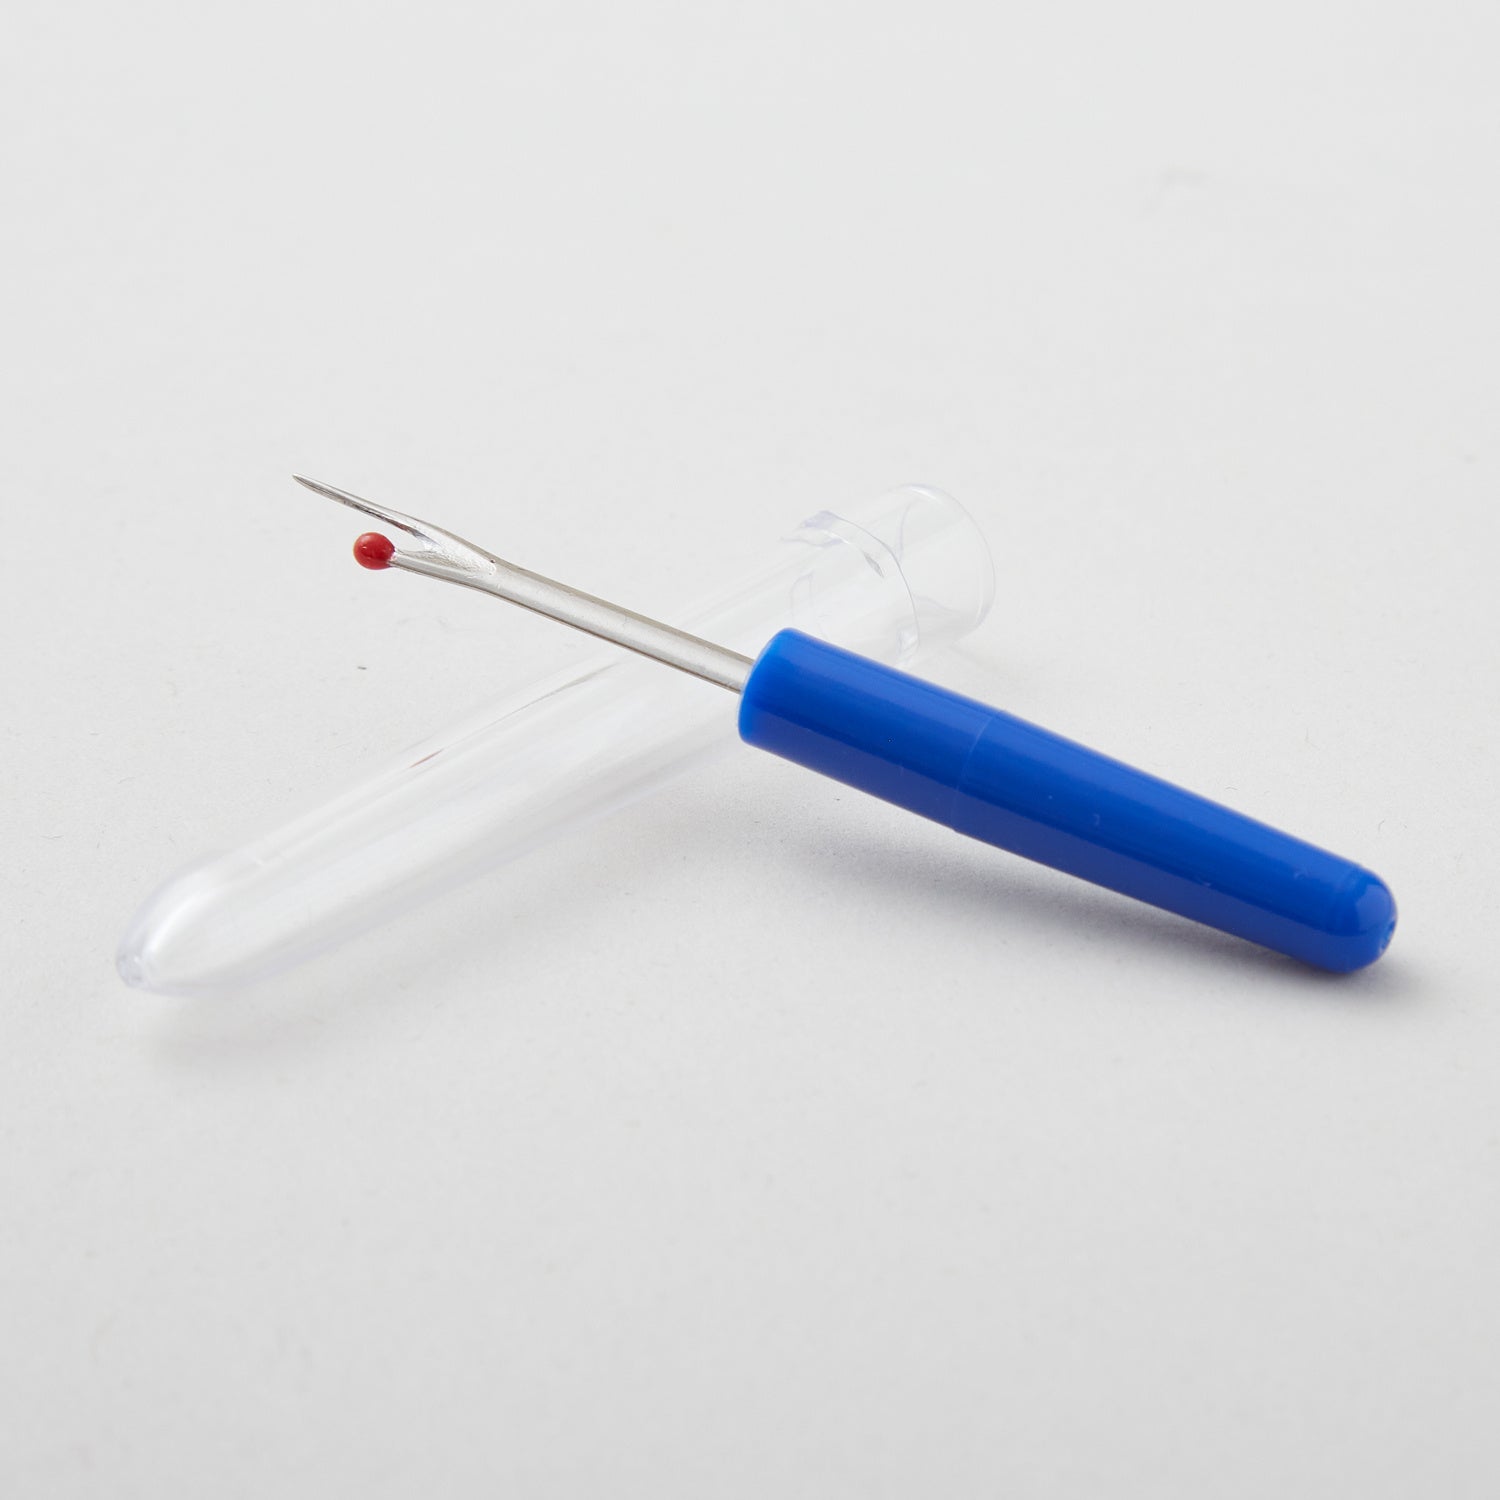 LIghted Seam Ripper- shipping included!